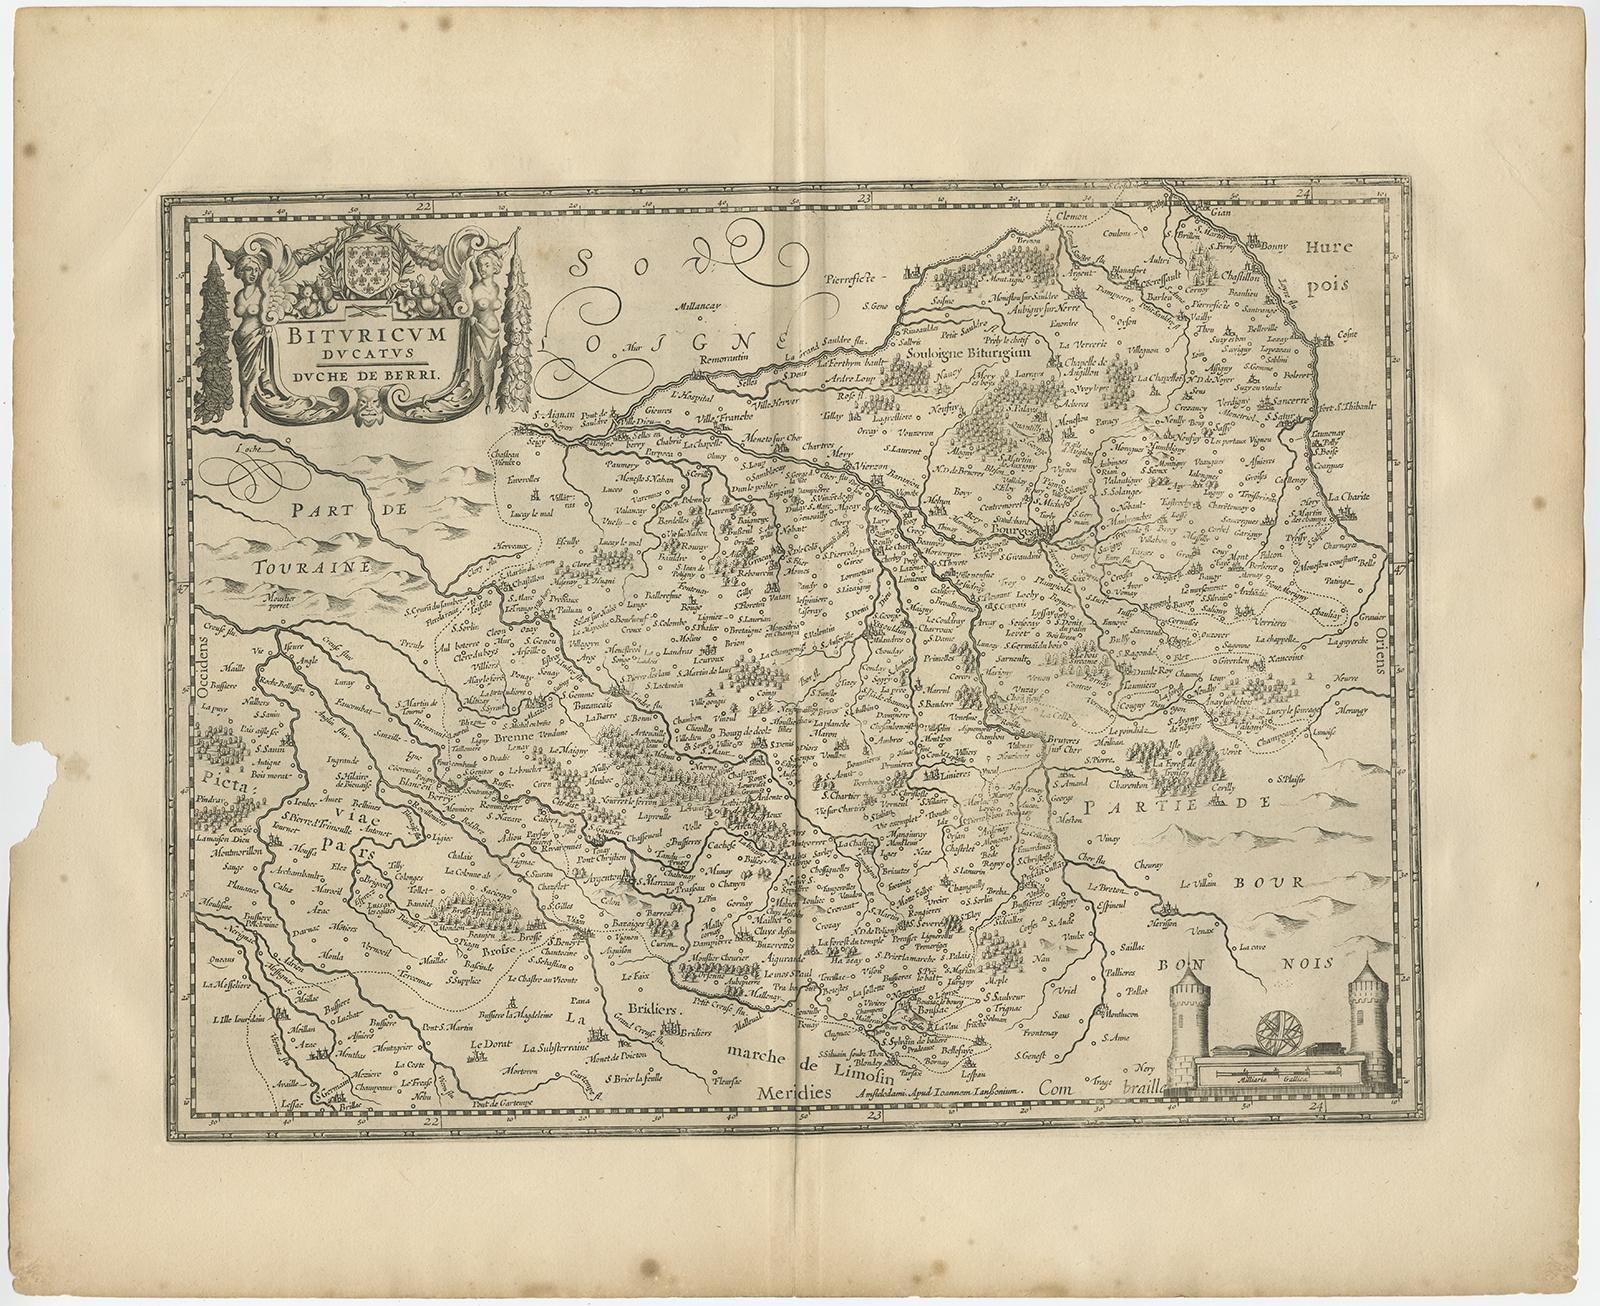 Antique map of France titled 'Bituricum Ducatus - Duche de Berri'. 

Decorative map of the Berry region, France. Berry is a region located in the center of France. It was a province of France until départements replaced the provinces on 4 March